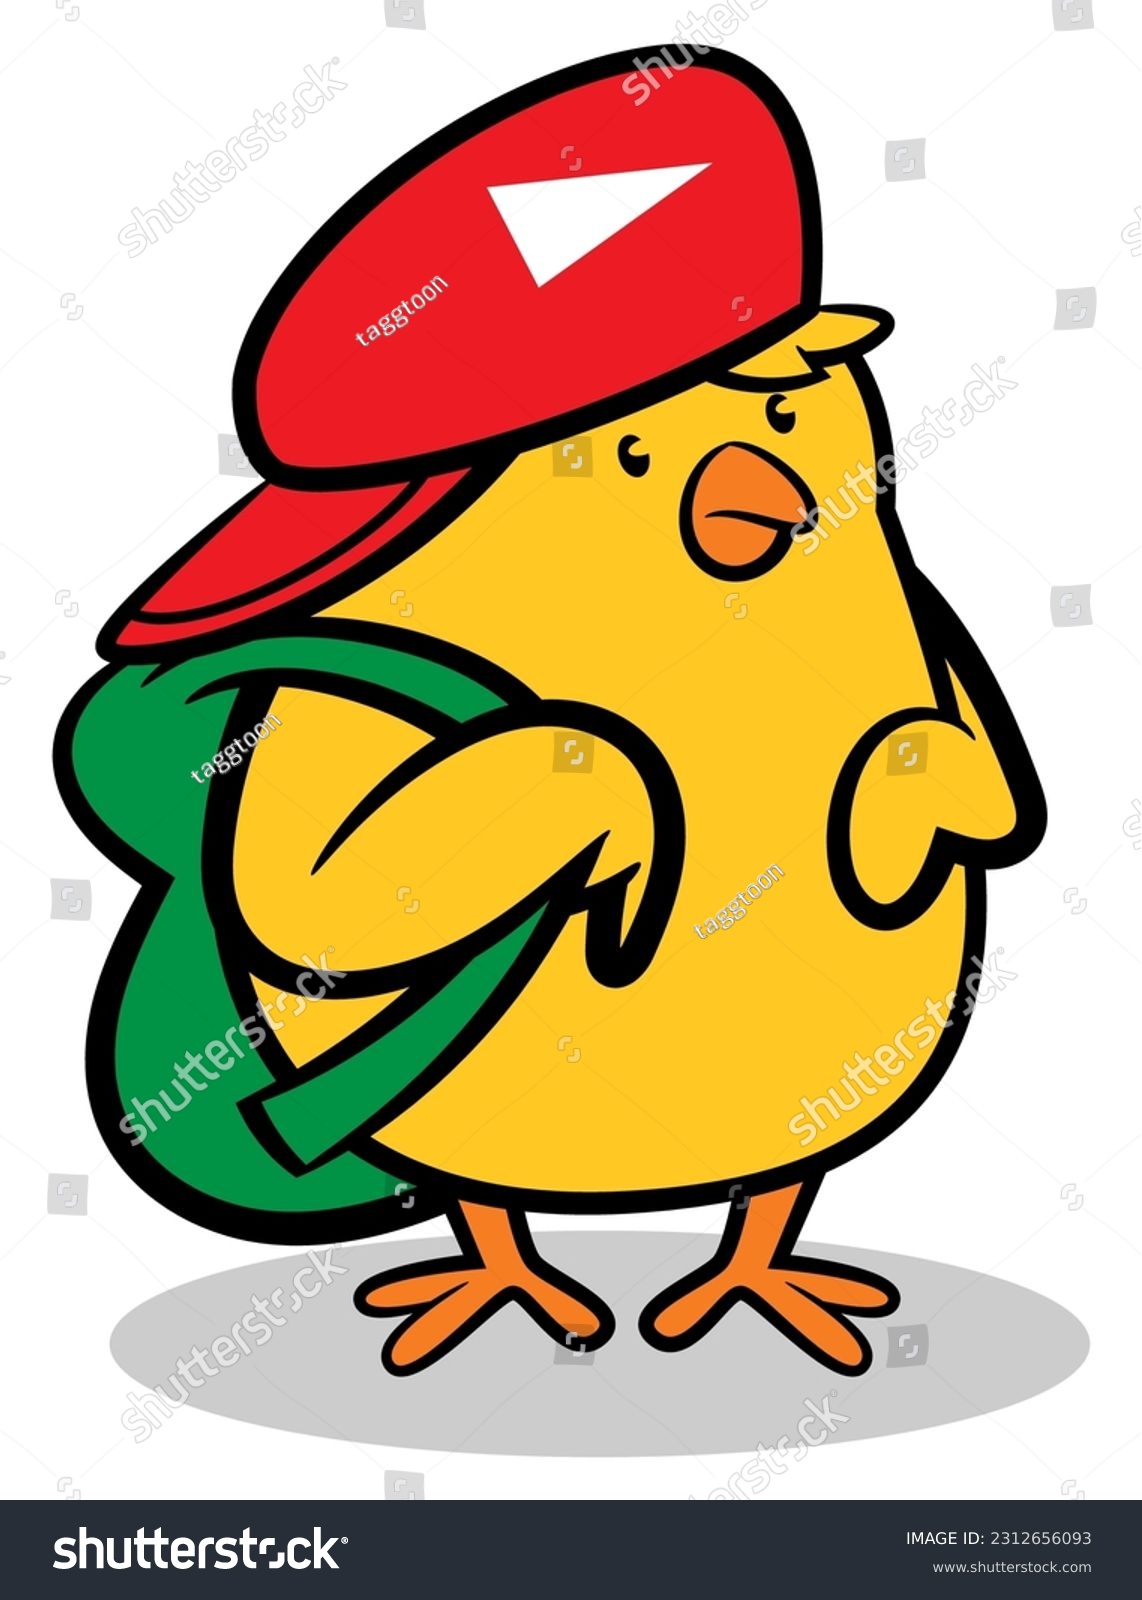 SVG of Little chicks cartoon characters wearing a red cap and carrying backpack get ready for going to school. Best for sticker, logo, and mascot with education themes for kids svg